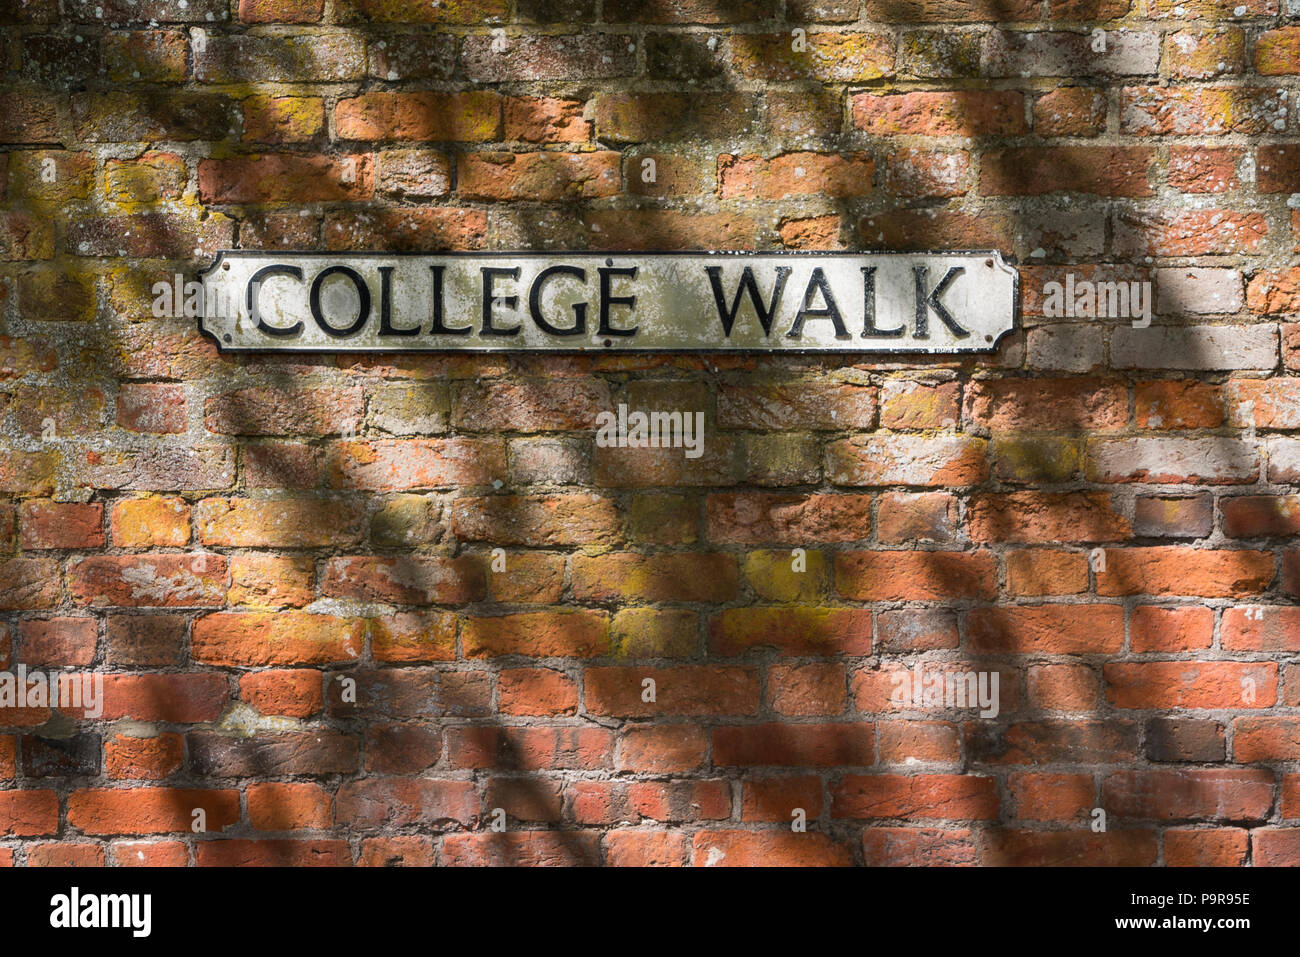 College Walk on a white street name sign set on a red brick wall Stock Photo